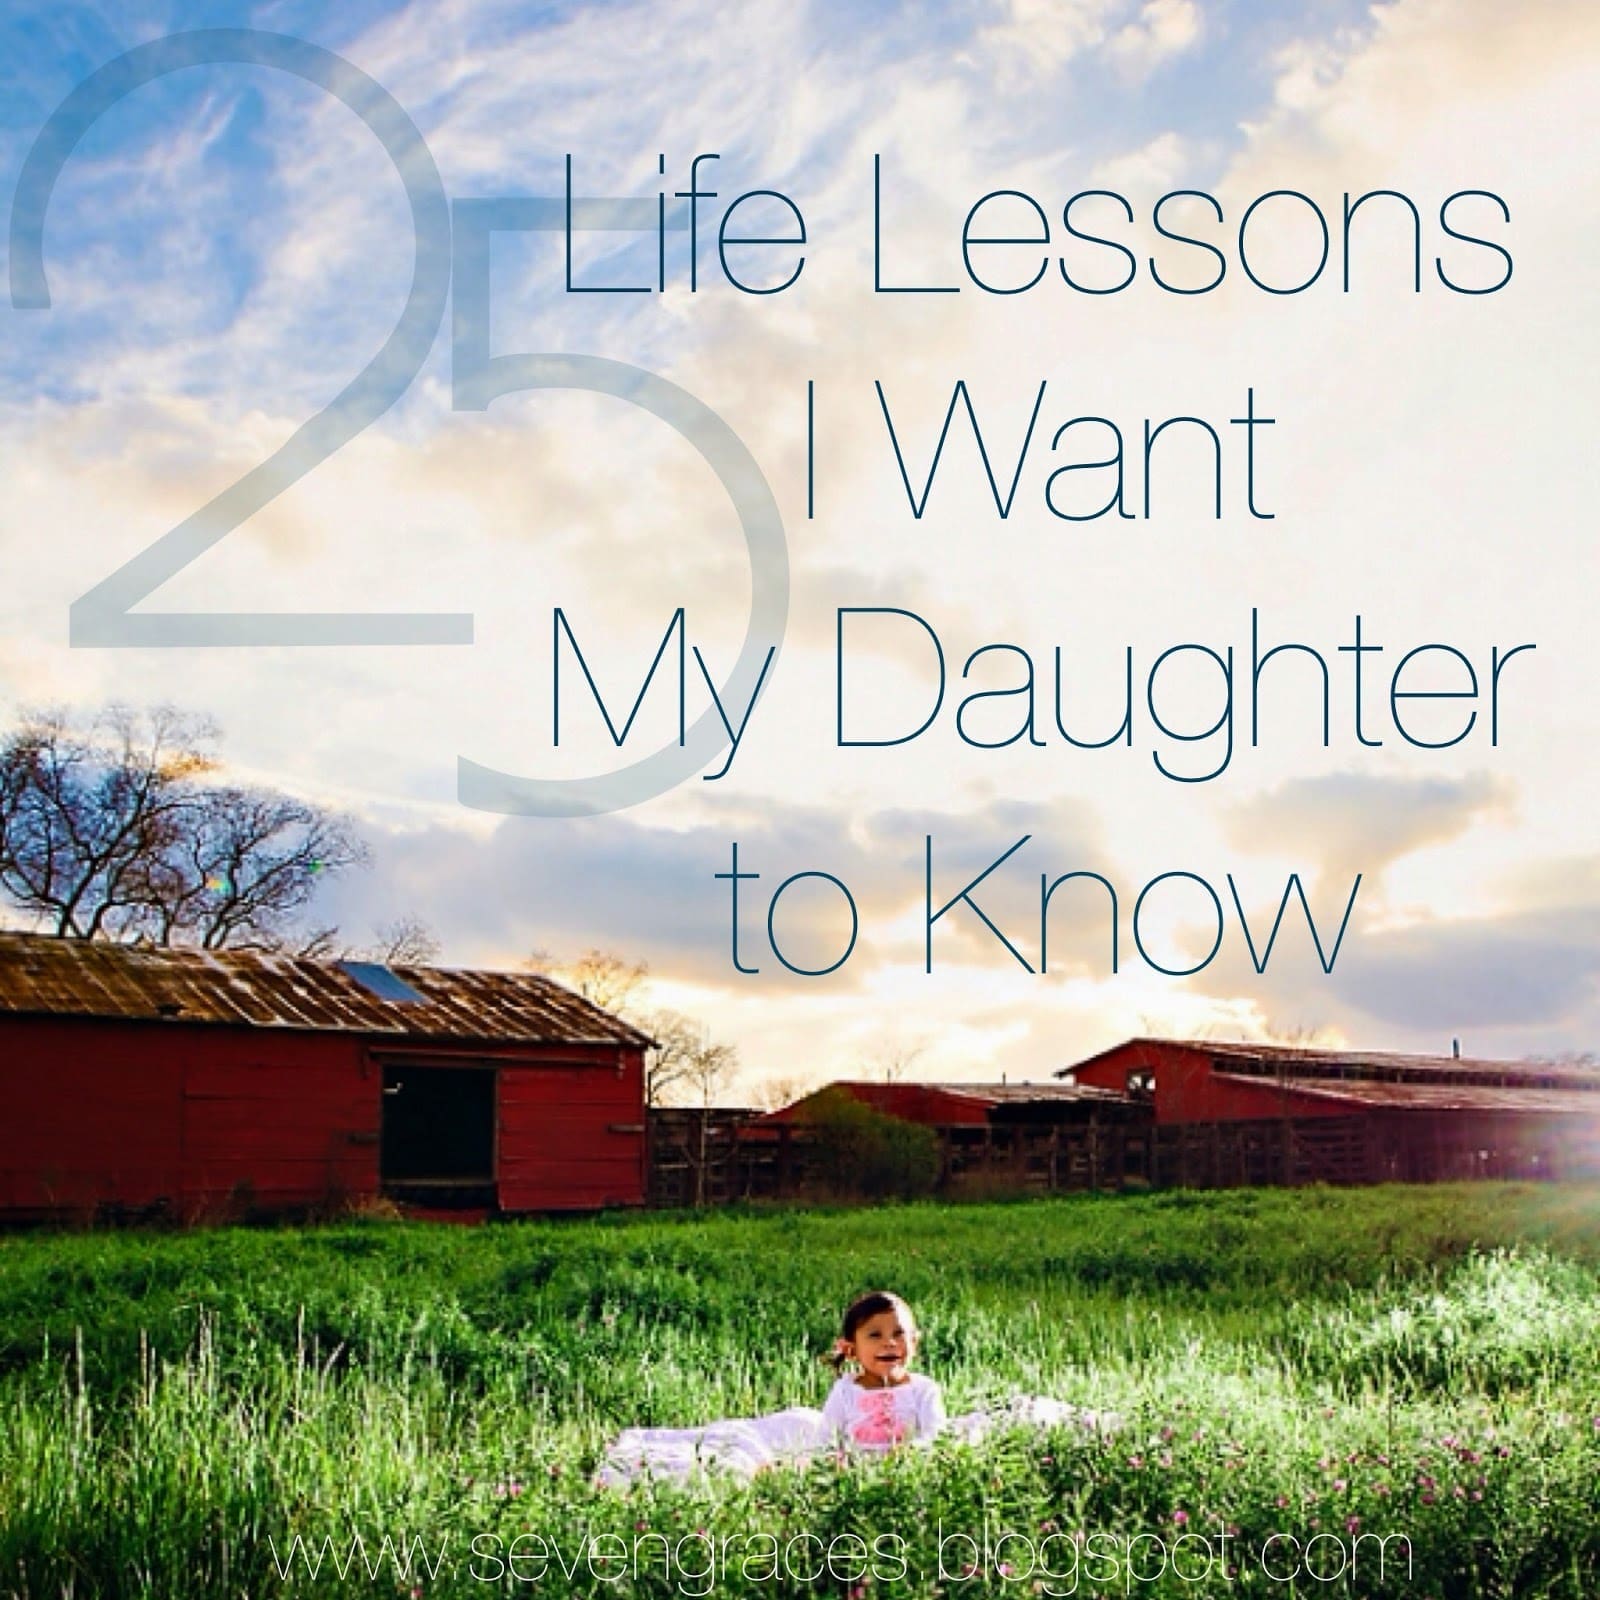 My daughter wants me. Daughter Life. Life Lessons. New Life with my daughter. My daughter is my Life шрифты.